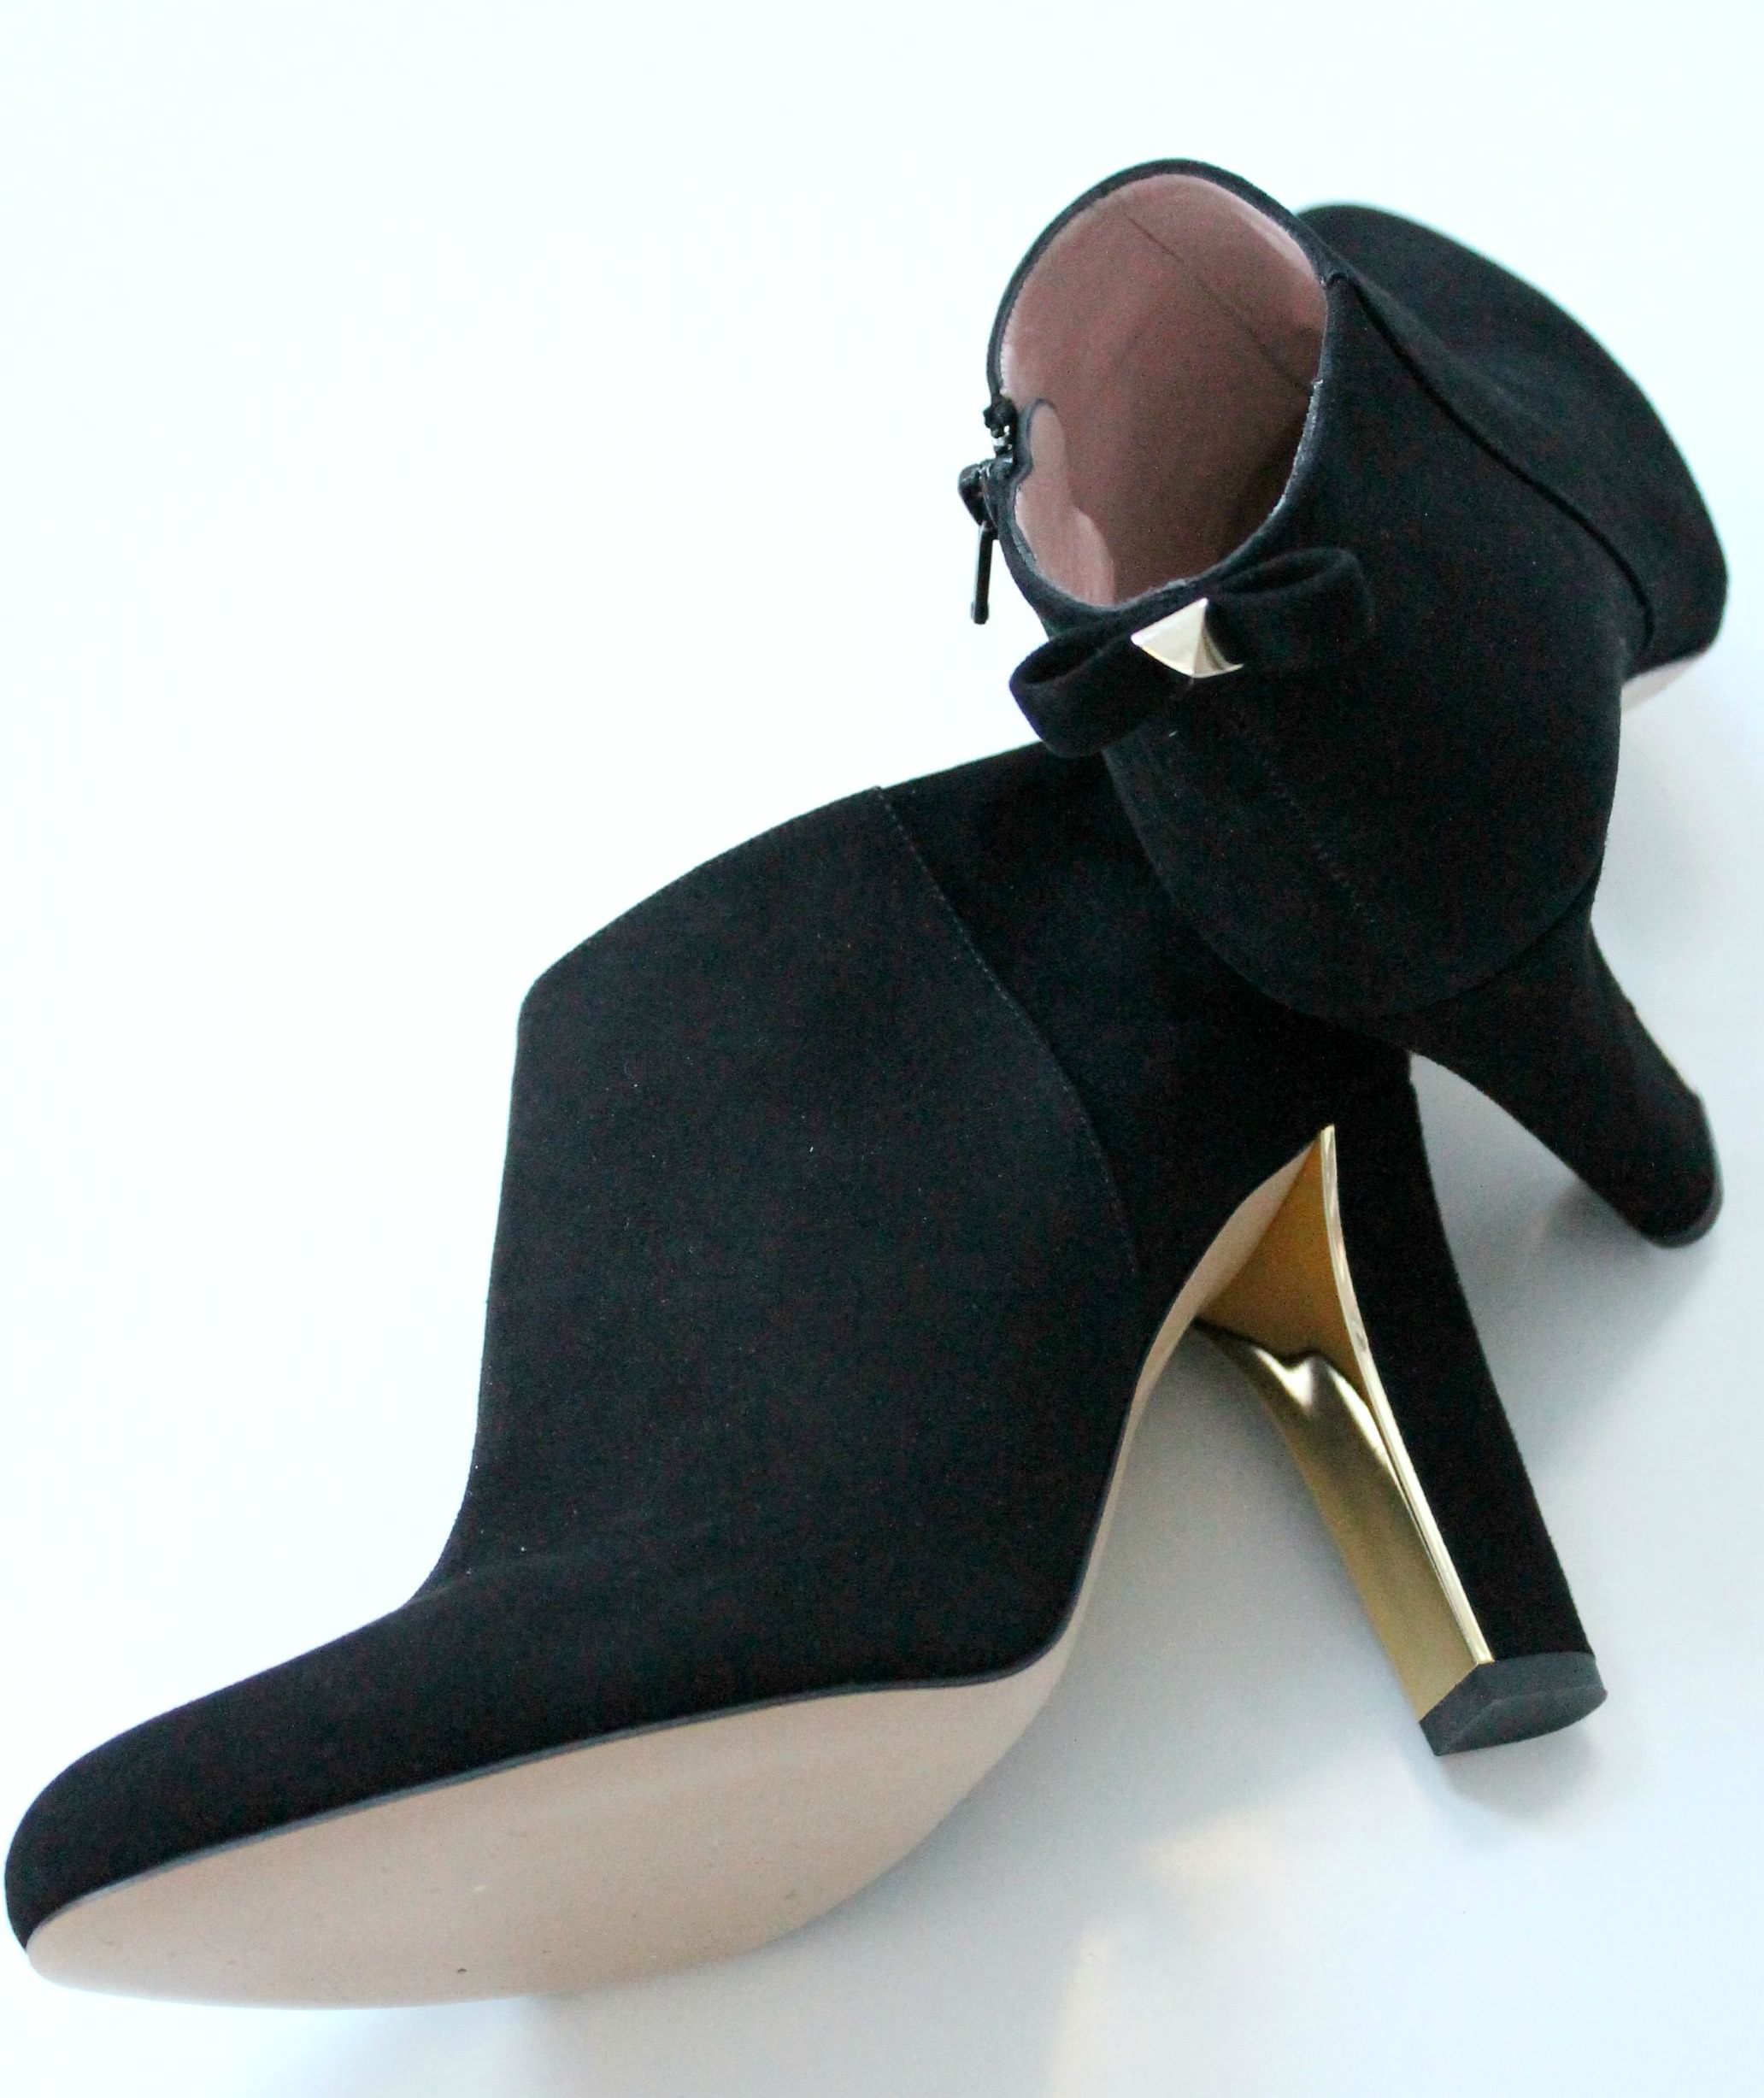 Kate-Spade-Netta-black-suede-shoes-1-photo-by-Little-Big-Bell